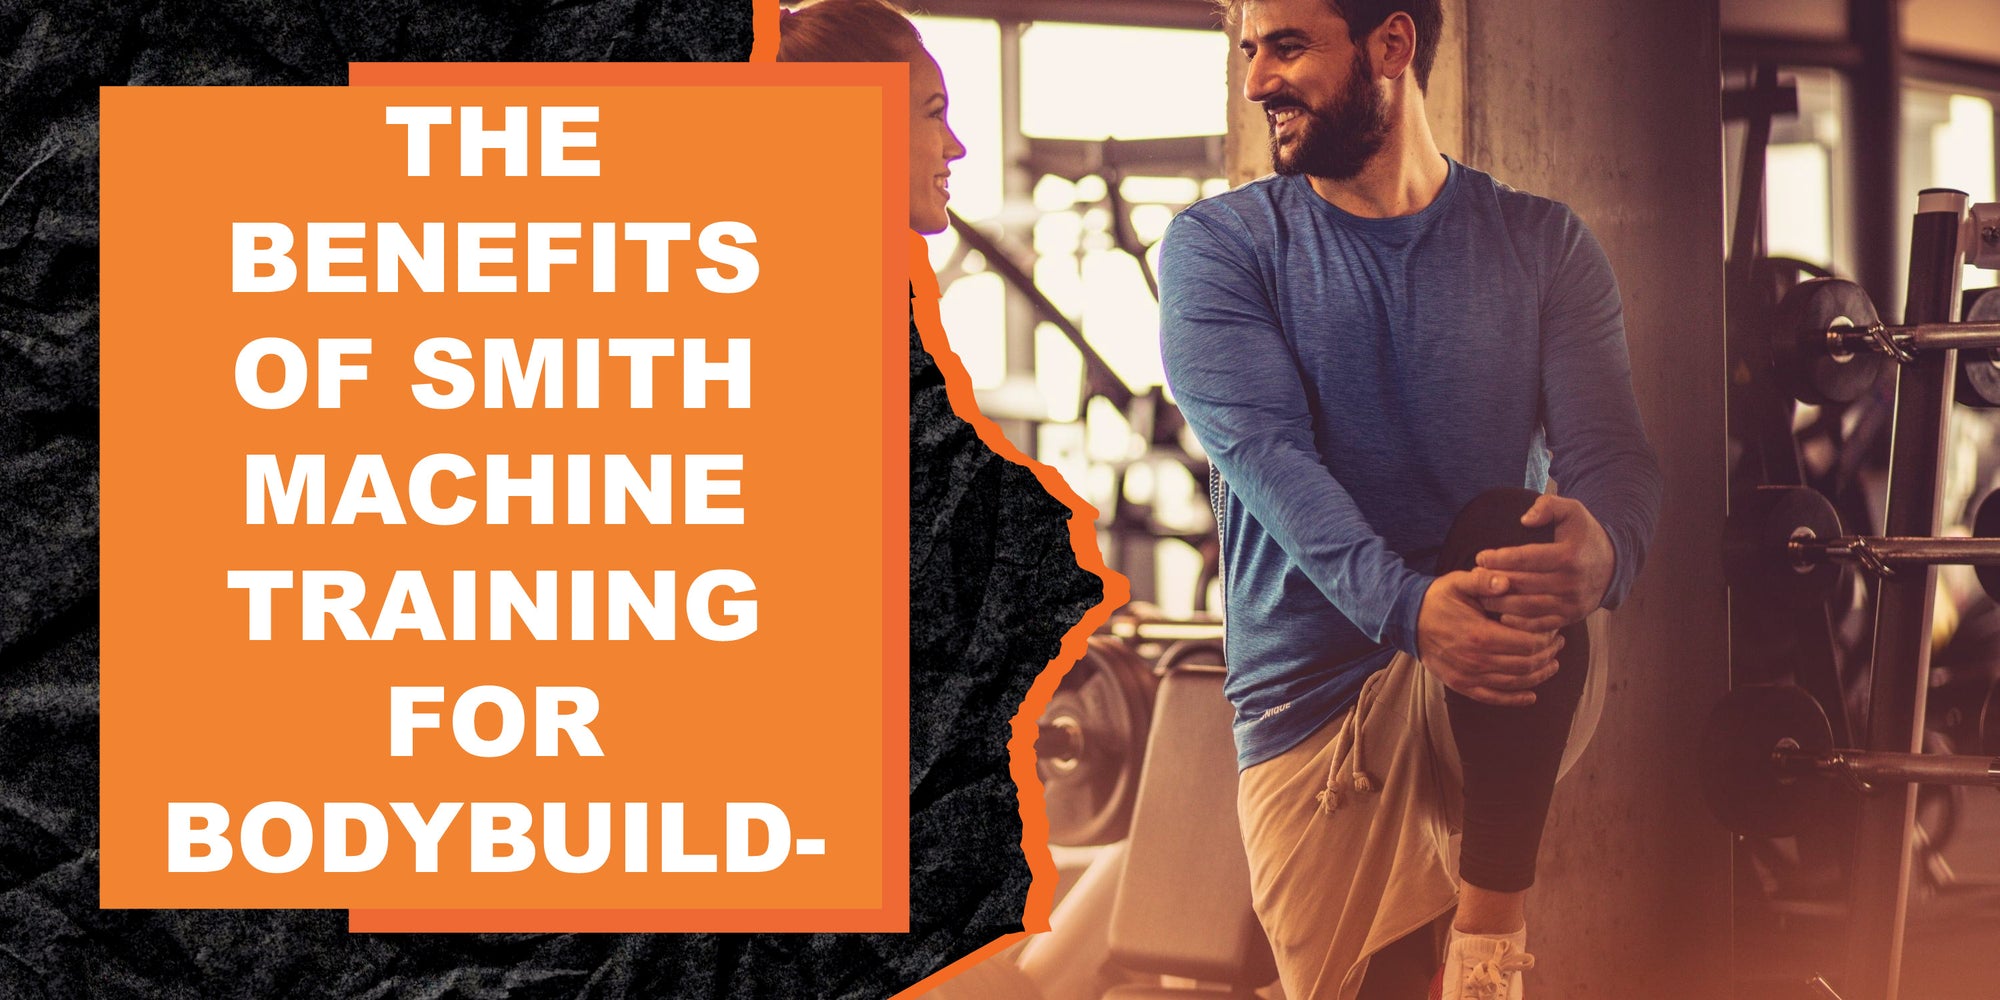 The Benefits of Smith Machine Training for Bodybuilding